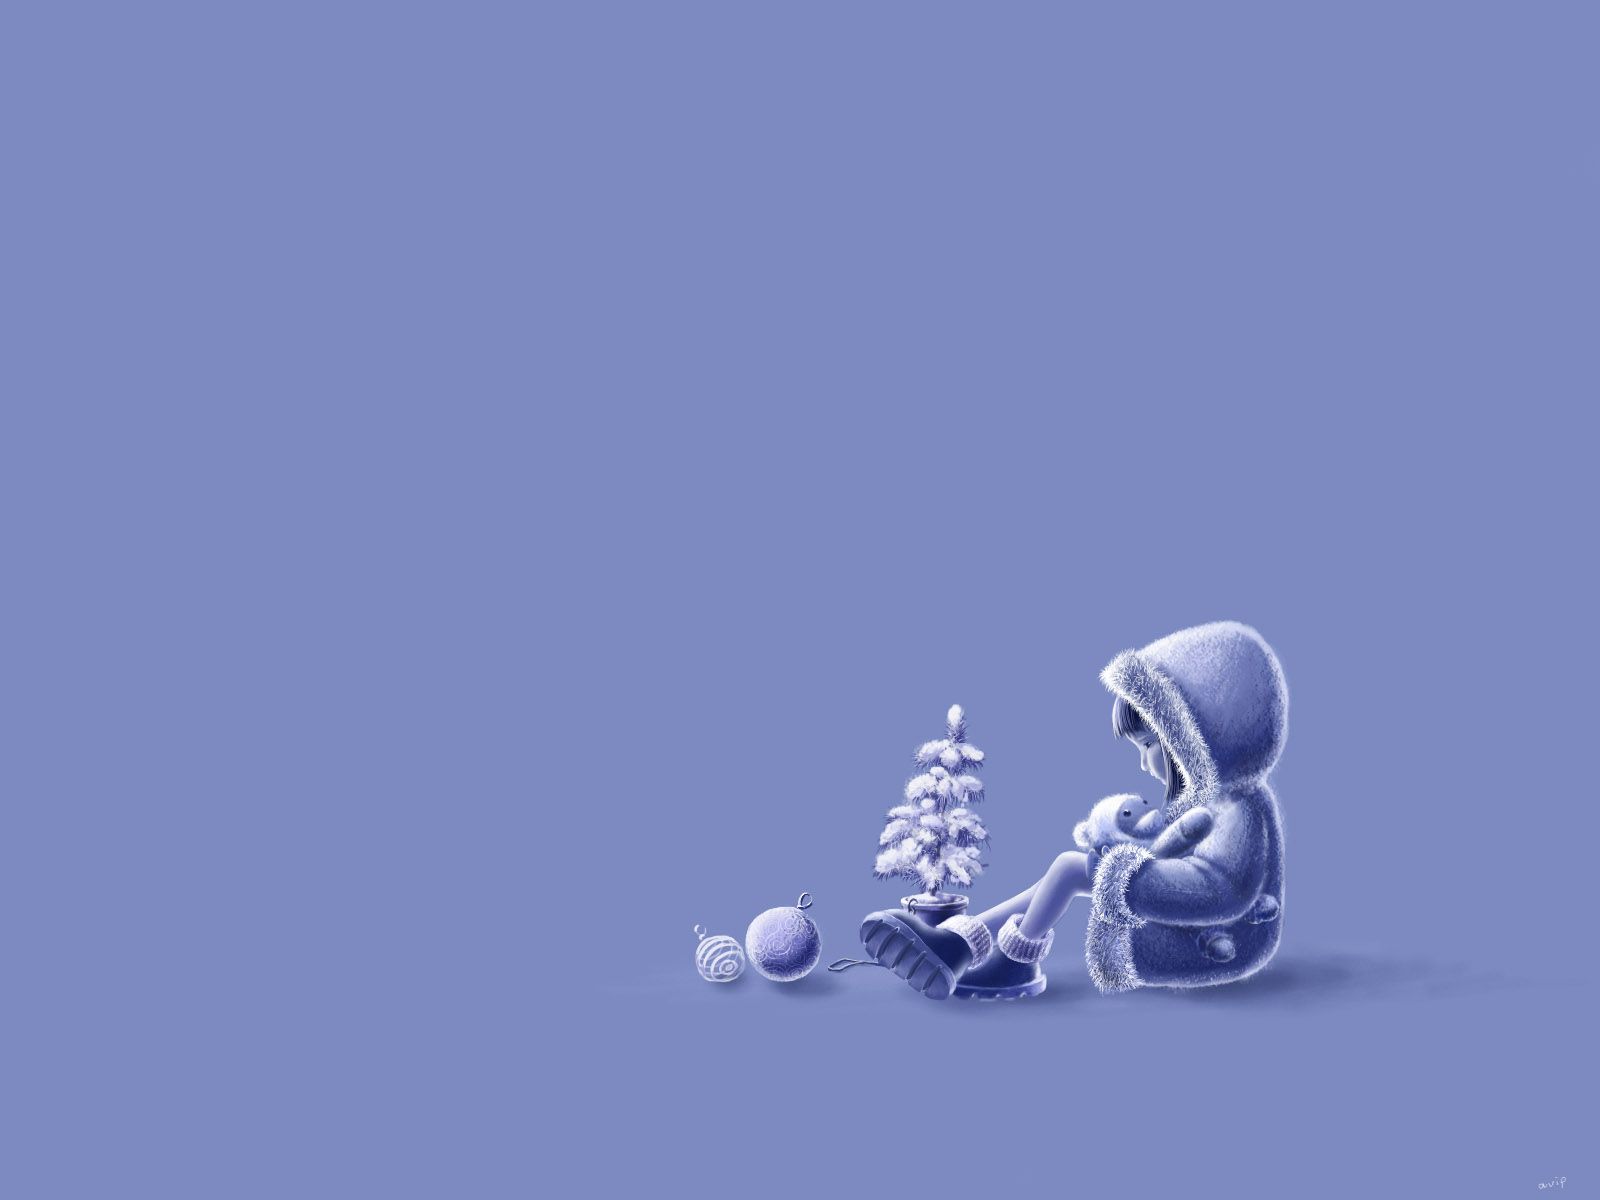 A Very Sad Christmas Story With A Happy Ending < 3D Art < Gallery